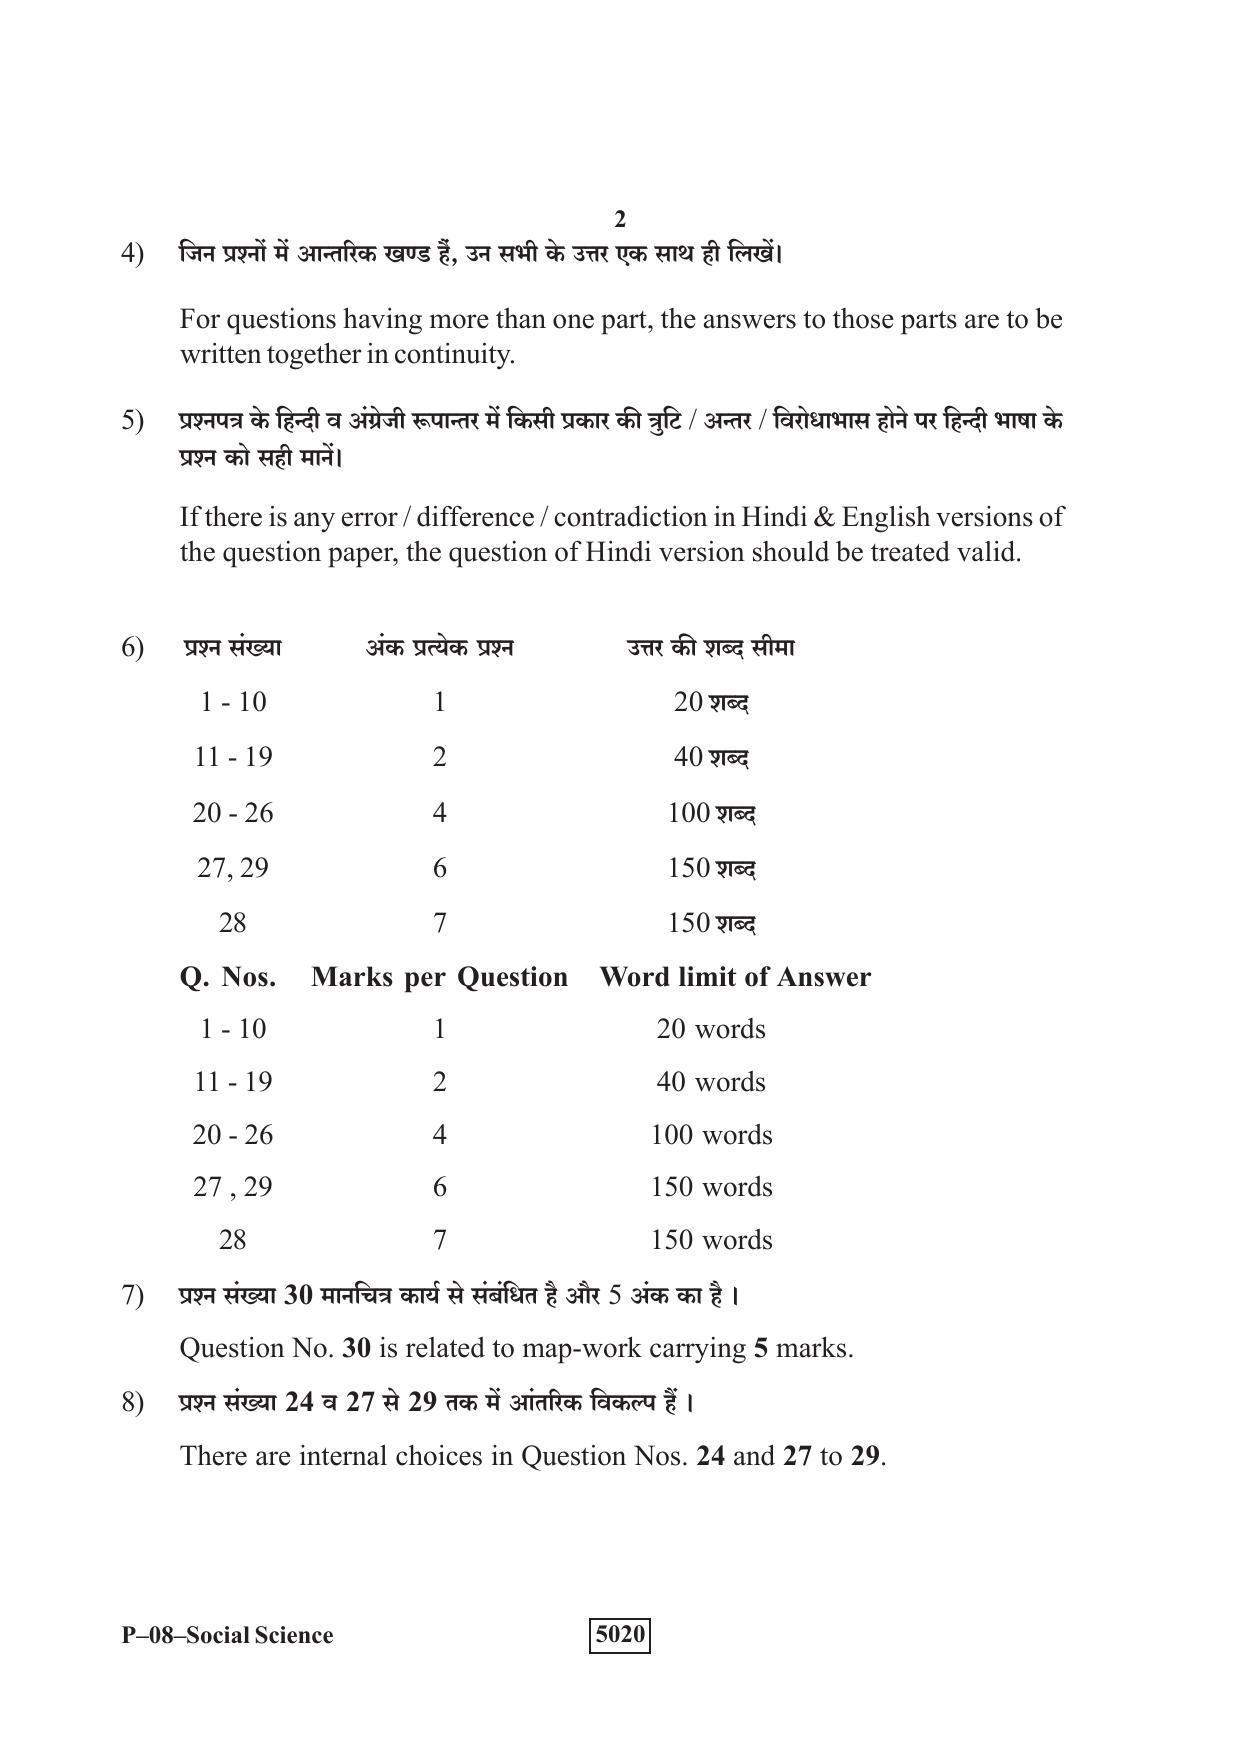 RBSE 2019 Social Science Praveshika Question Paper - Page 2